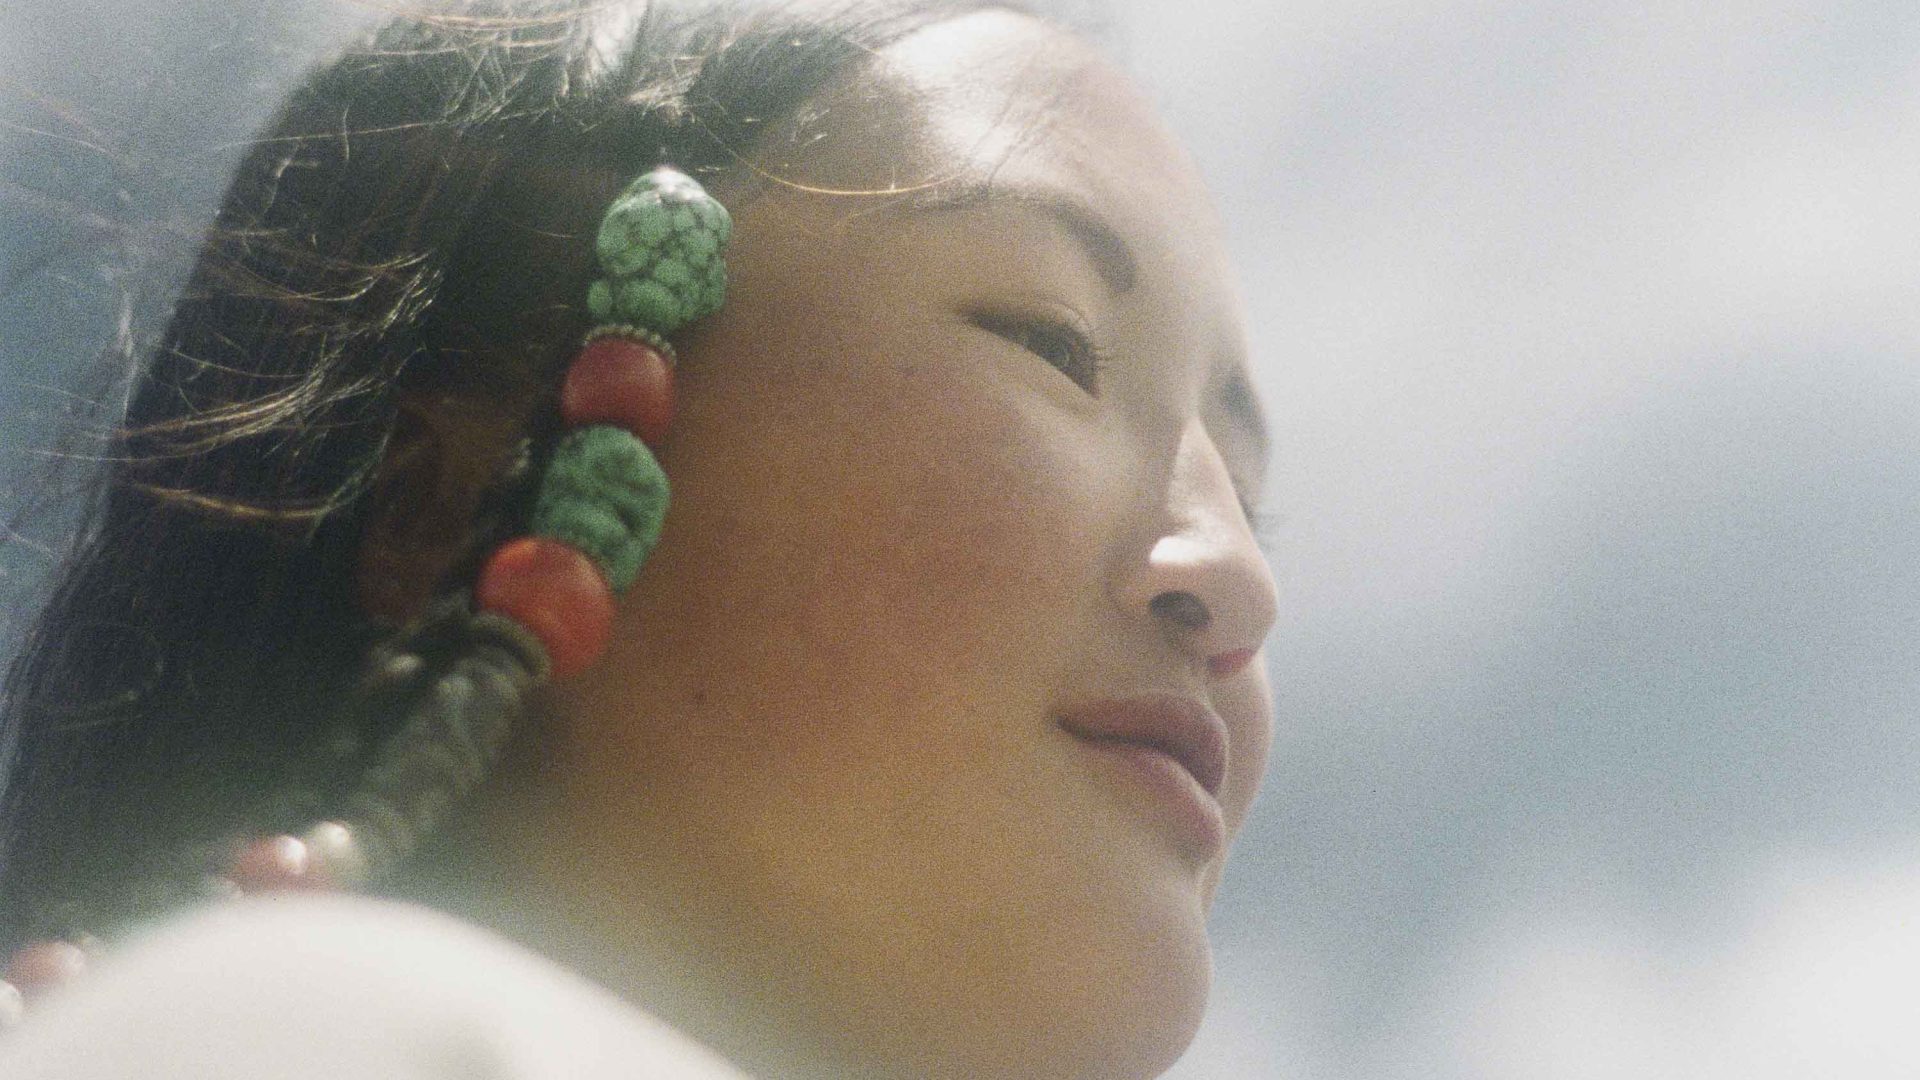 A close up of a young girls face. She has red and green beads in her hair.